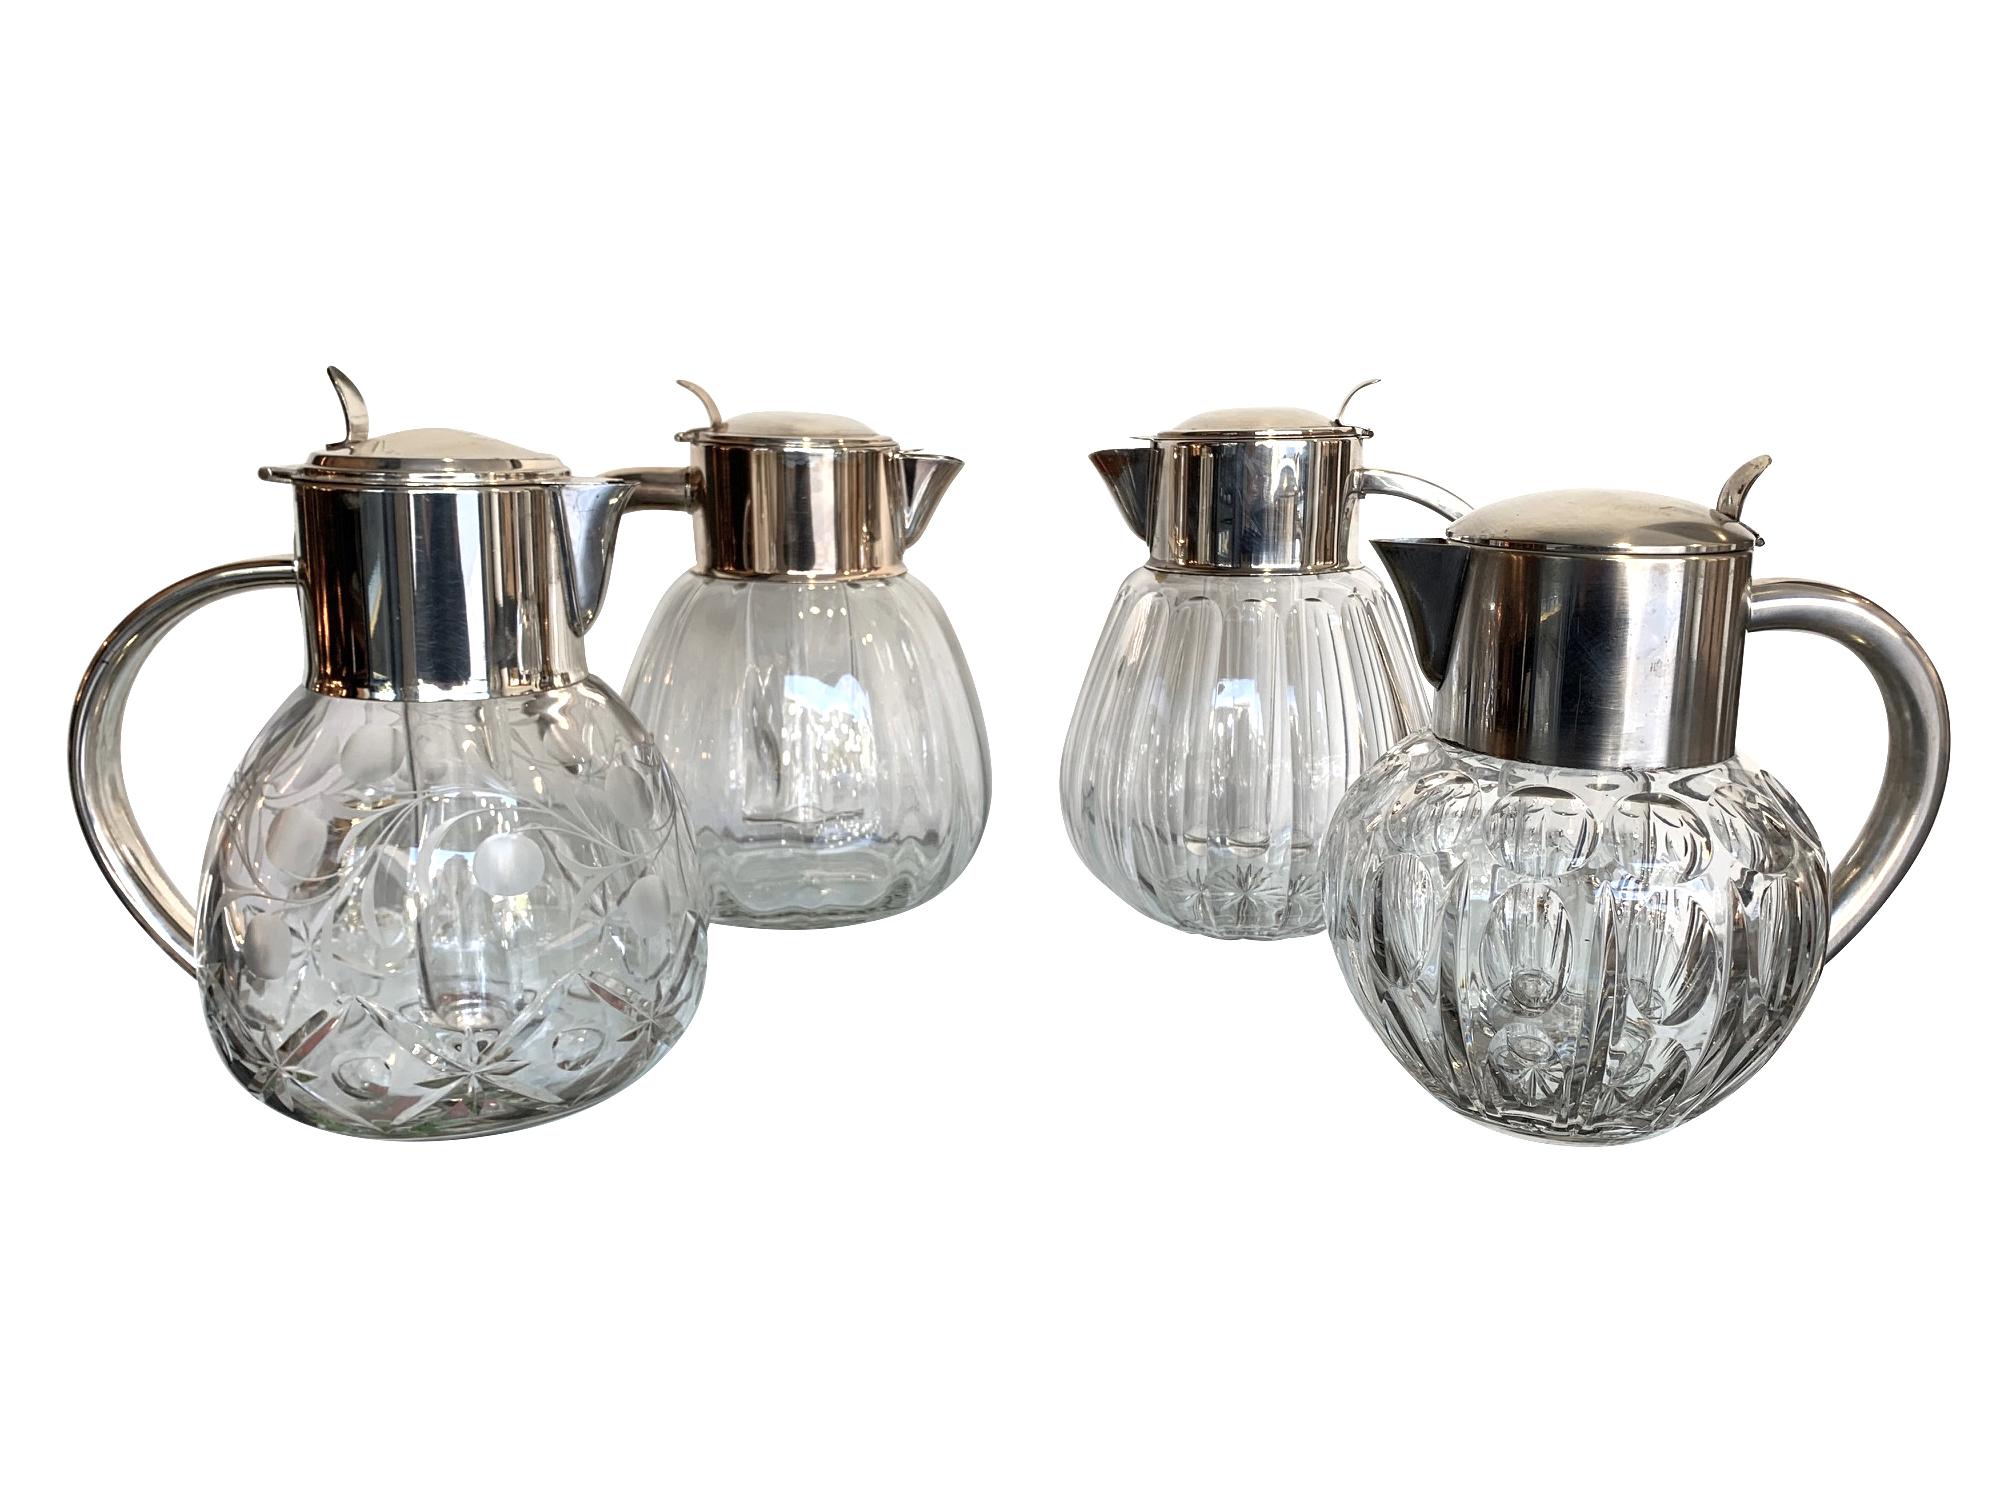 British Silver Plated Faceted Crystal Lemonade Jug with Central Glass Ice Compartment